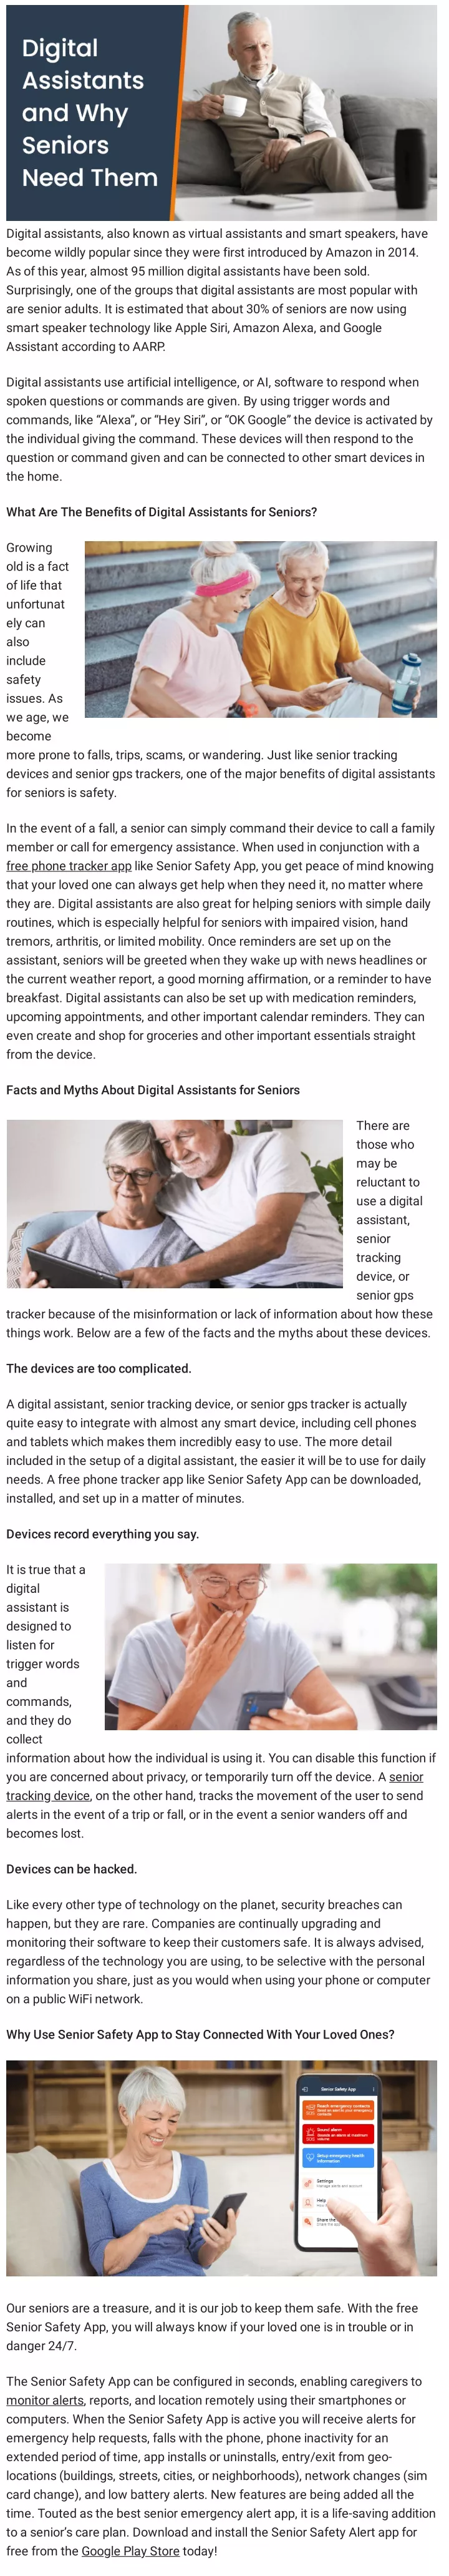 digital assistants and why seniors need them